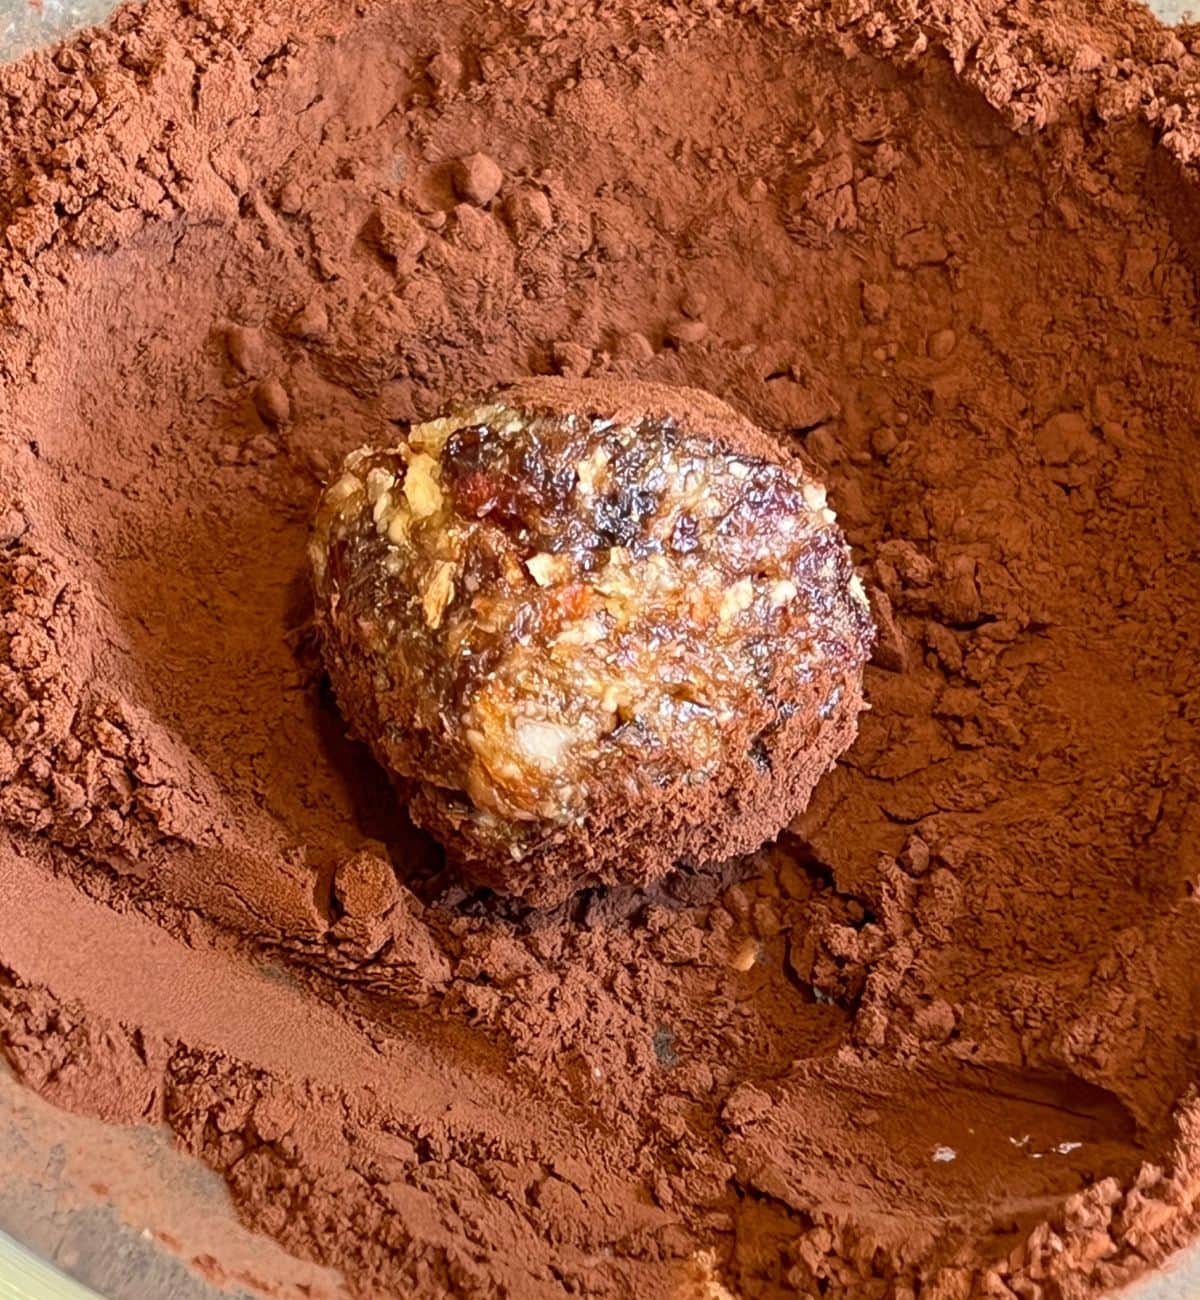 Bliss ball in cocoa powder.